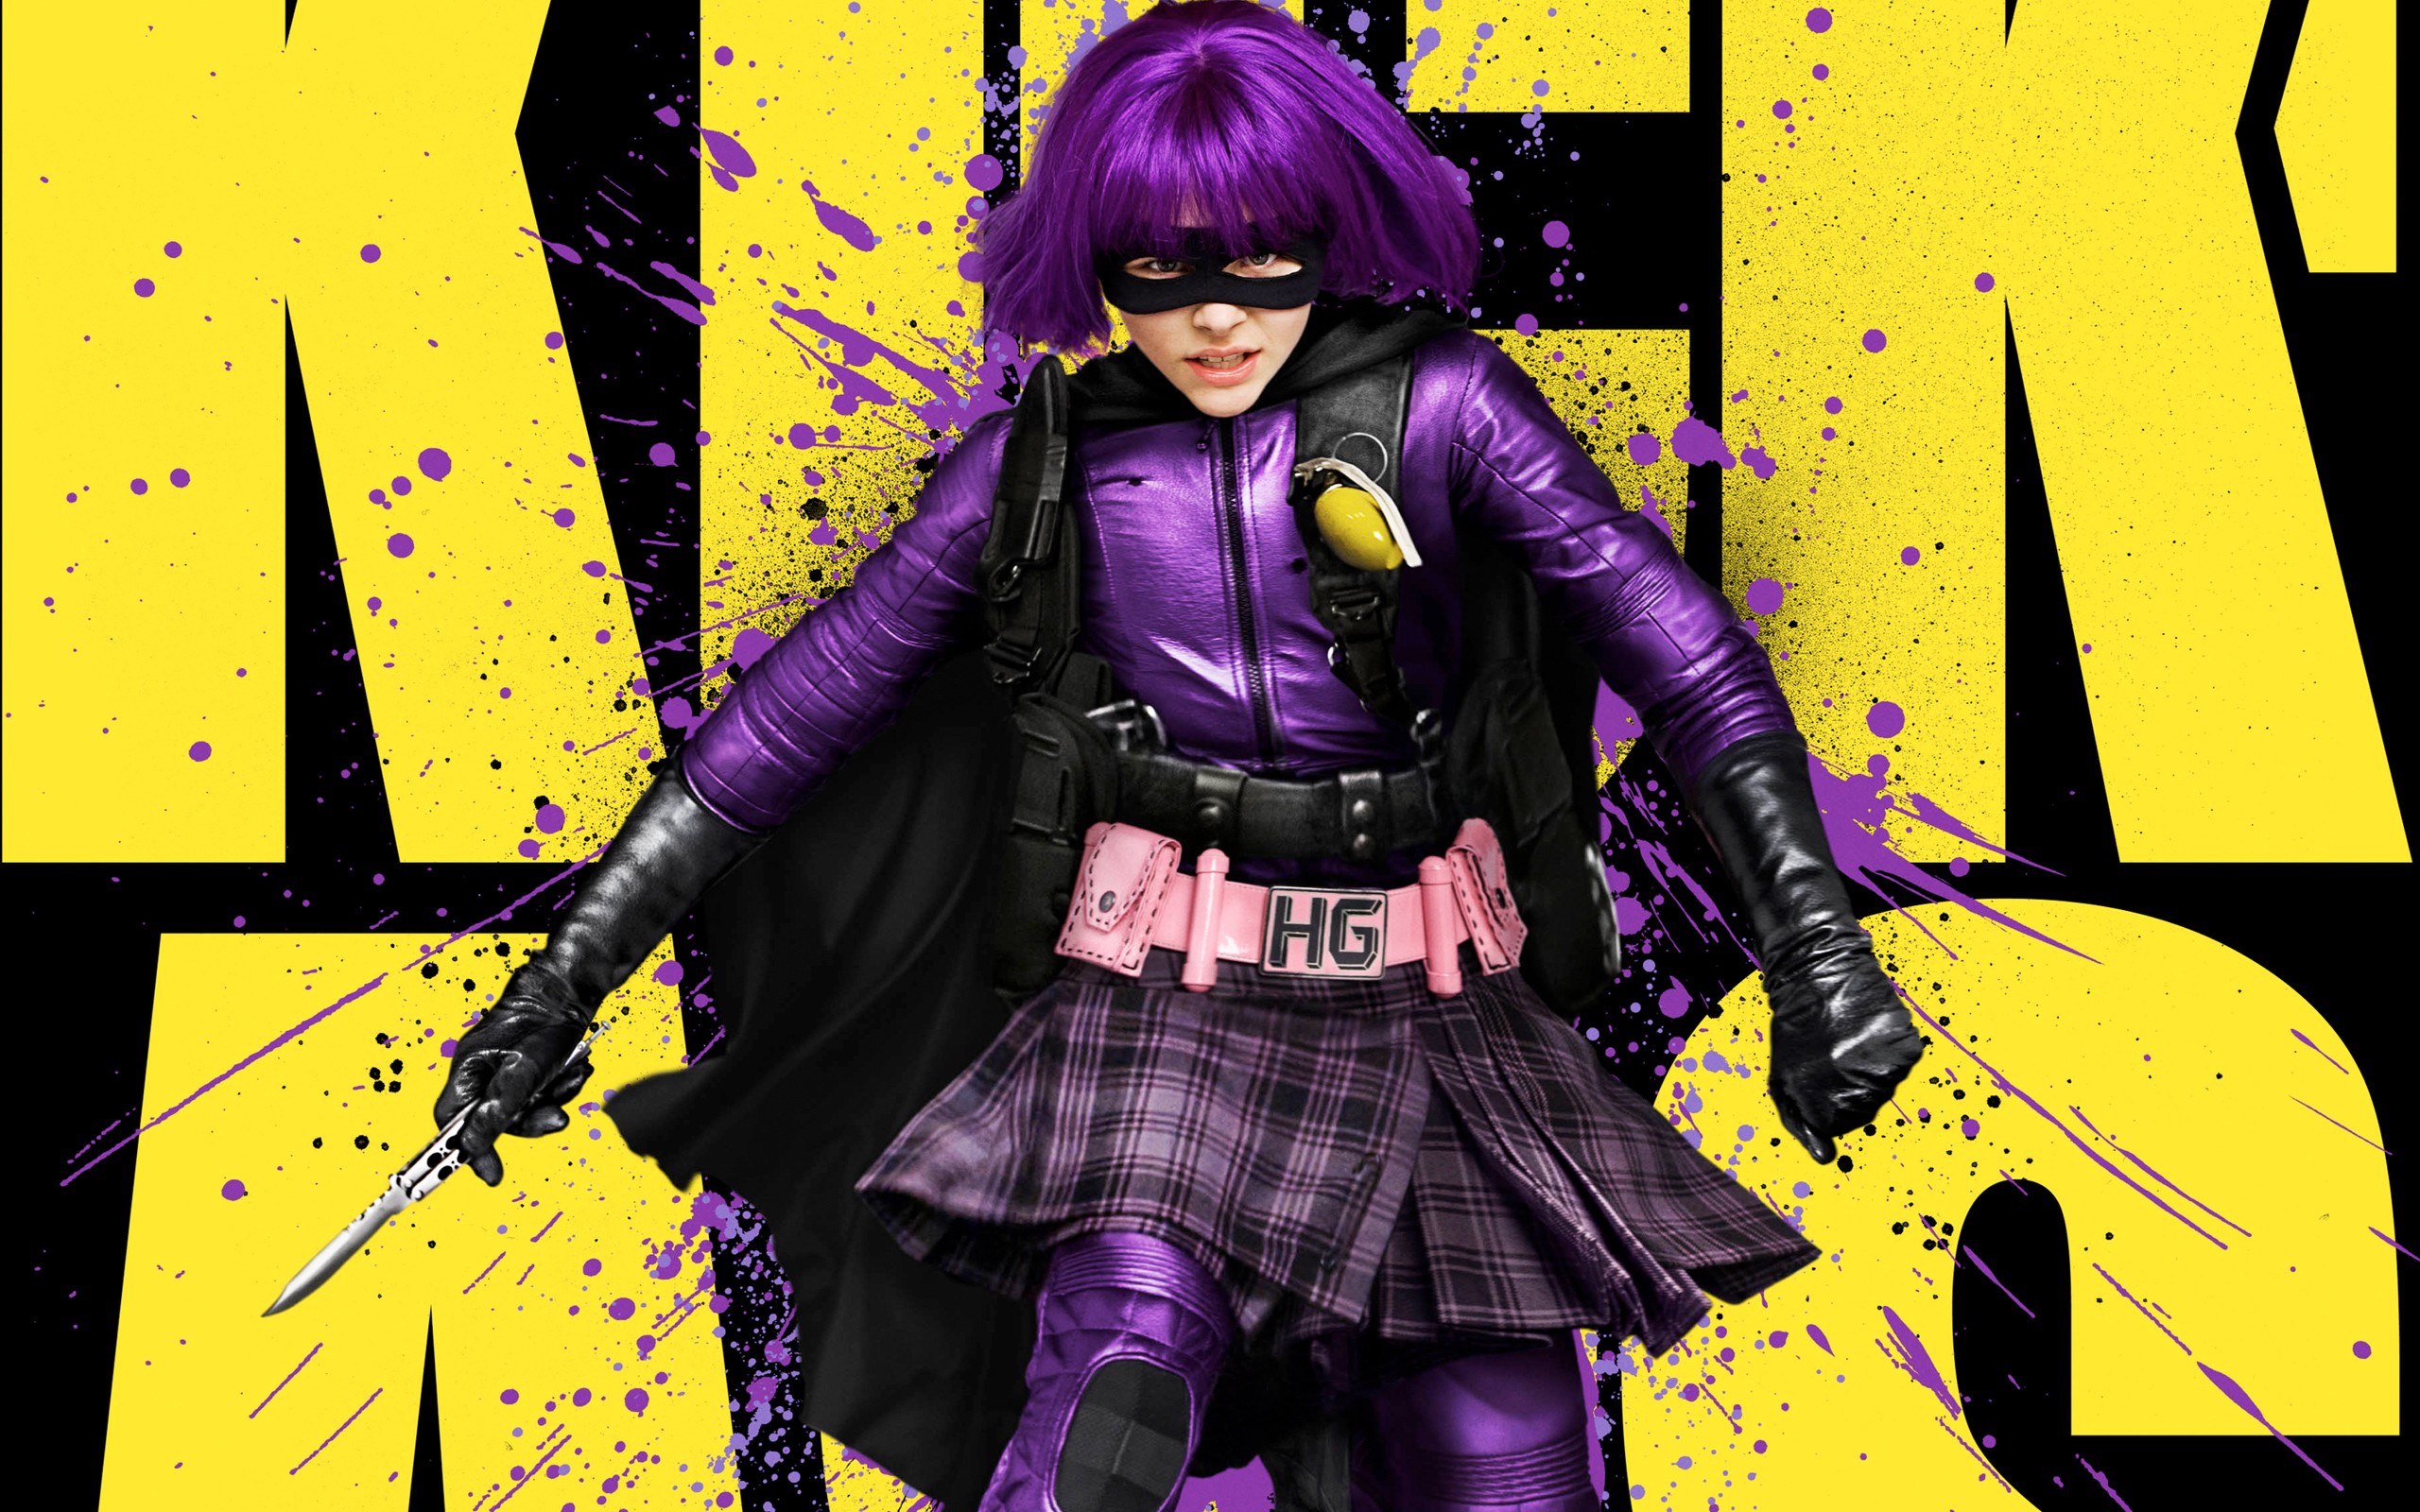 Free Download Hit Girl Kick Ass Wallpaper 30883744 2560x1600 For Your 0515